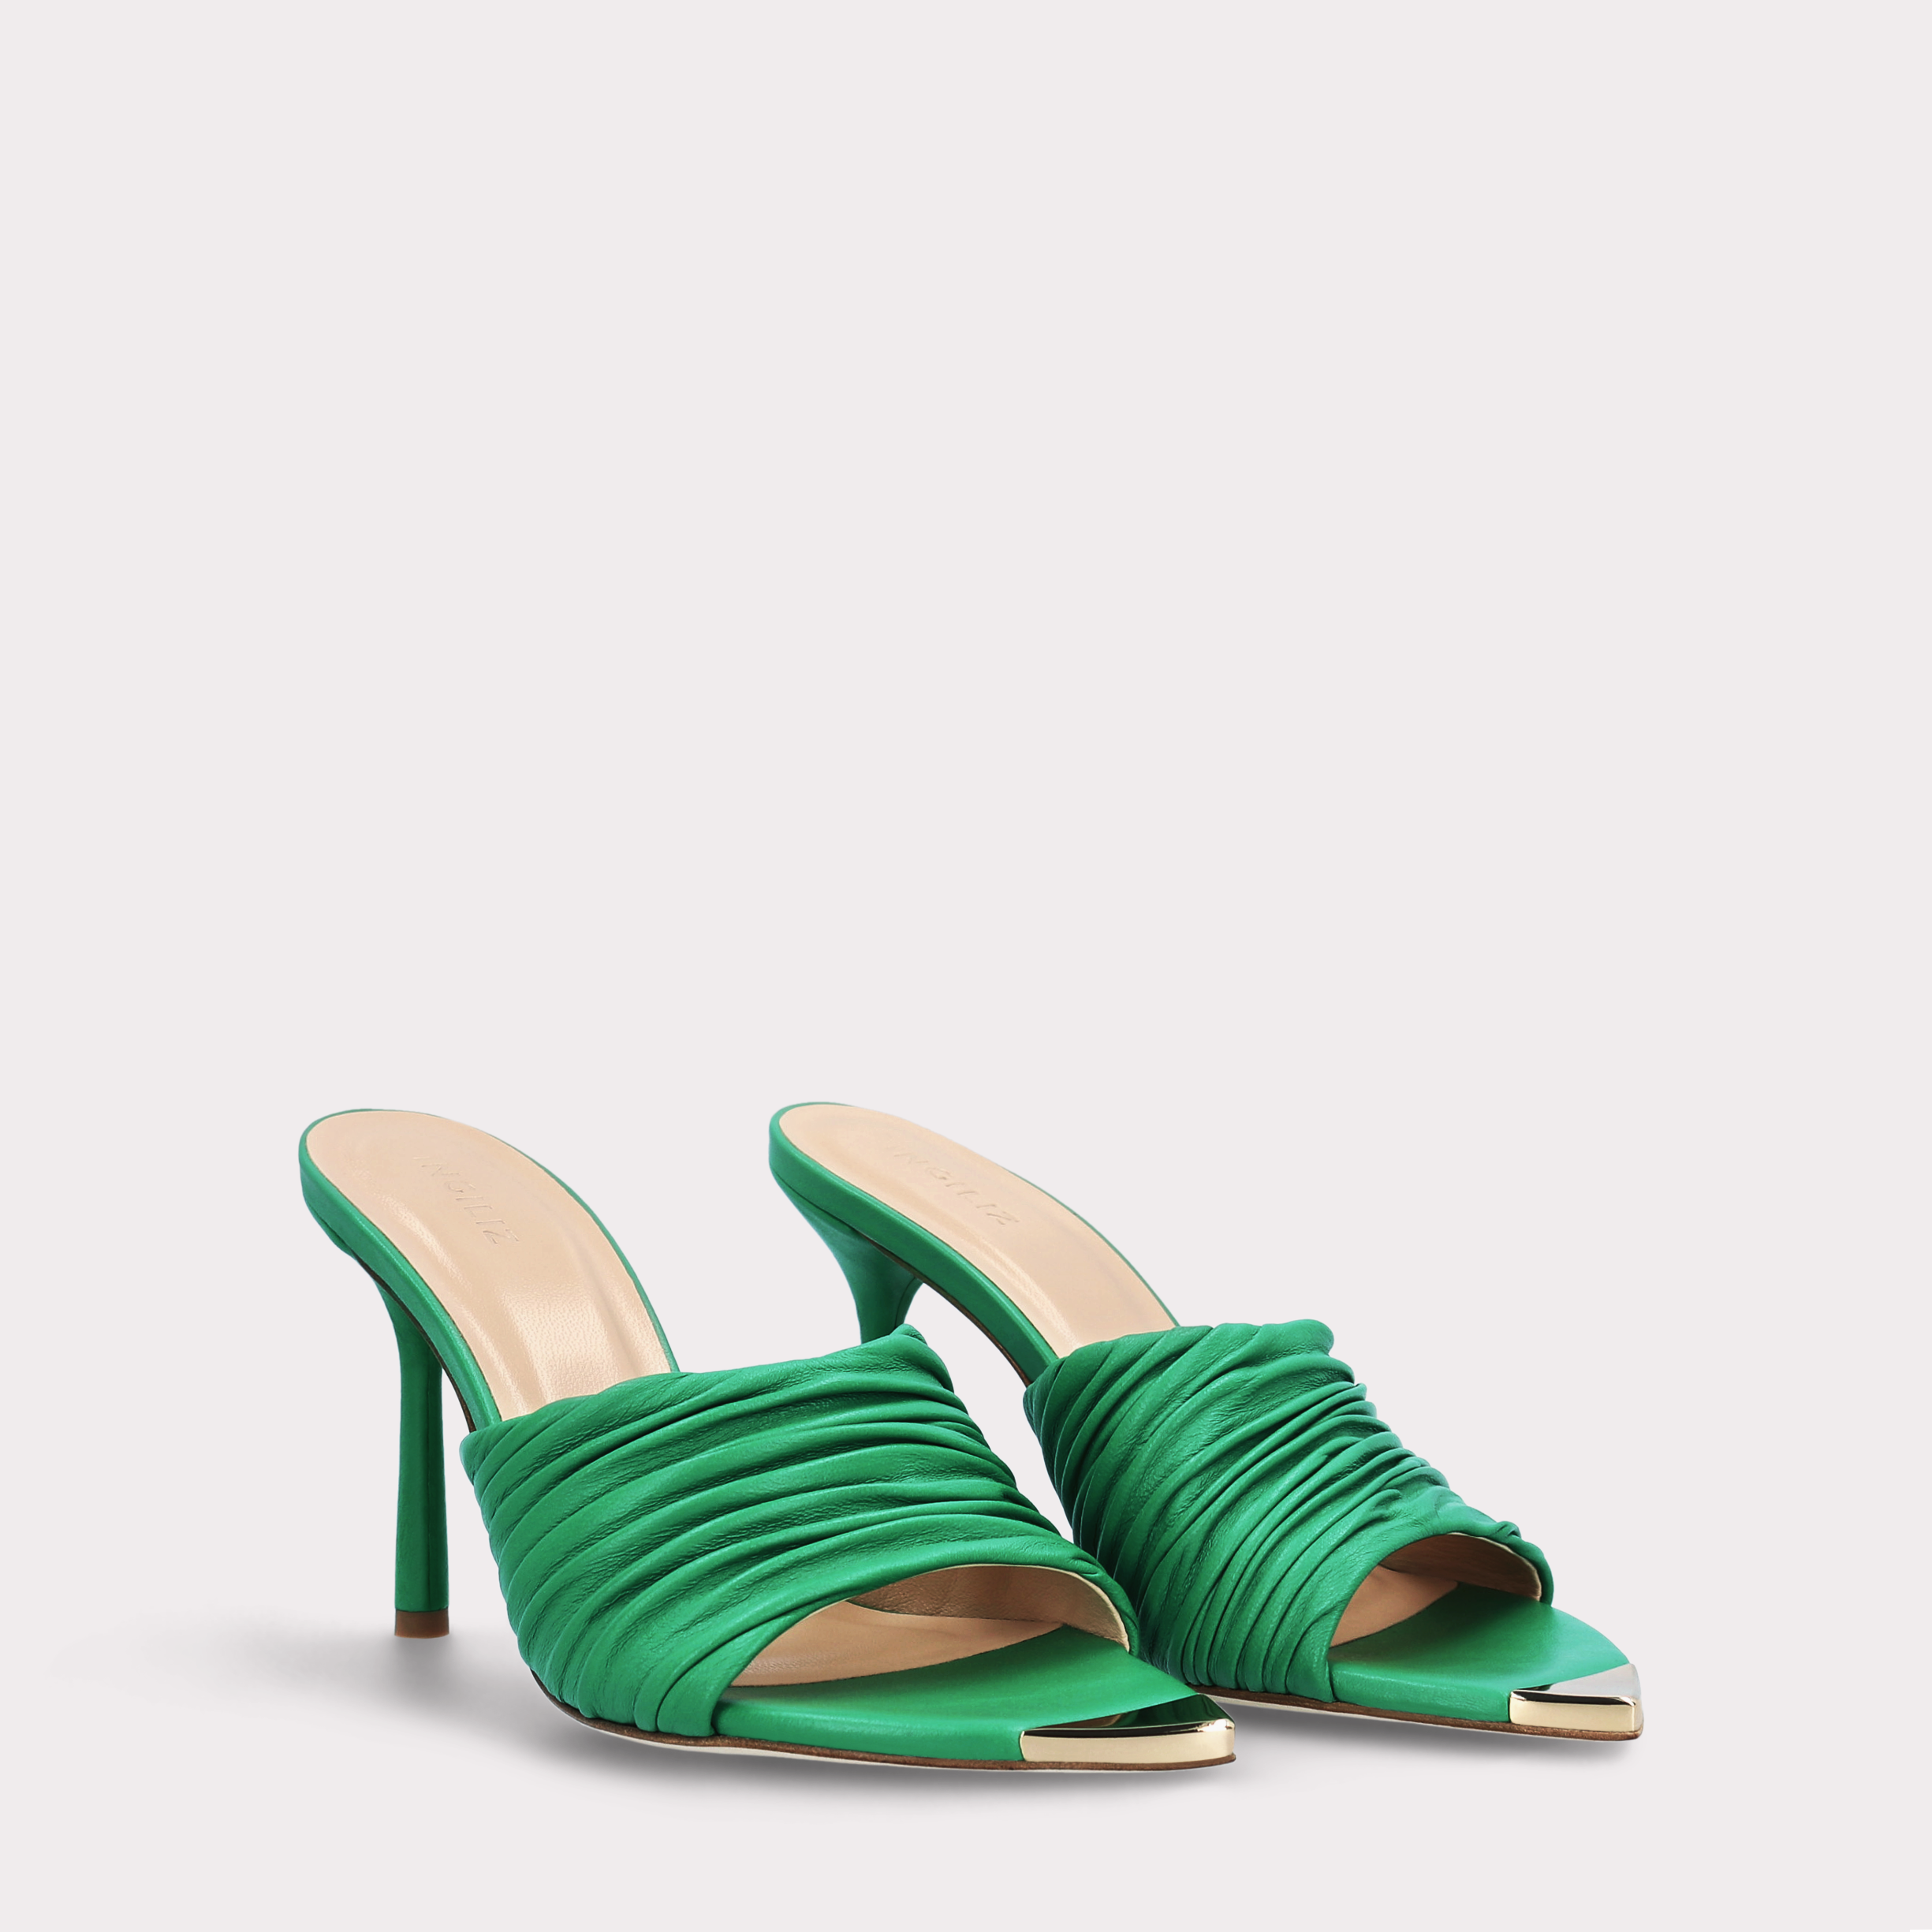 ANNY 03 GREEN LEATHER SANDALS